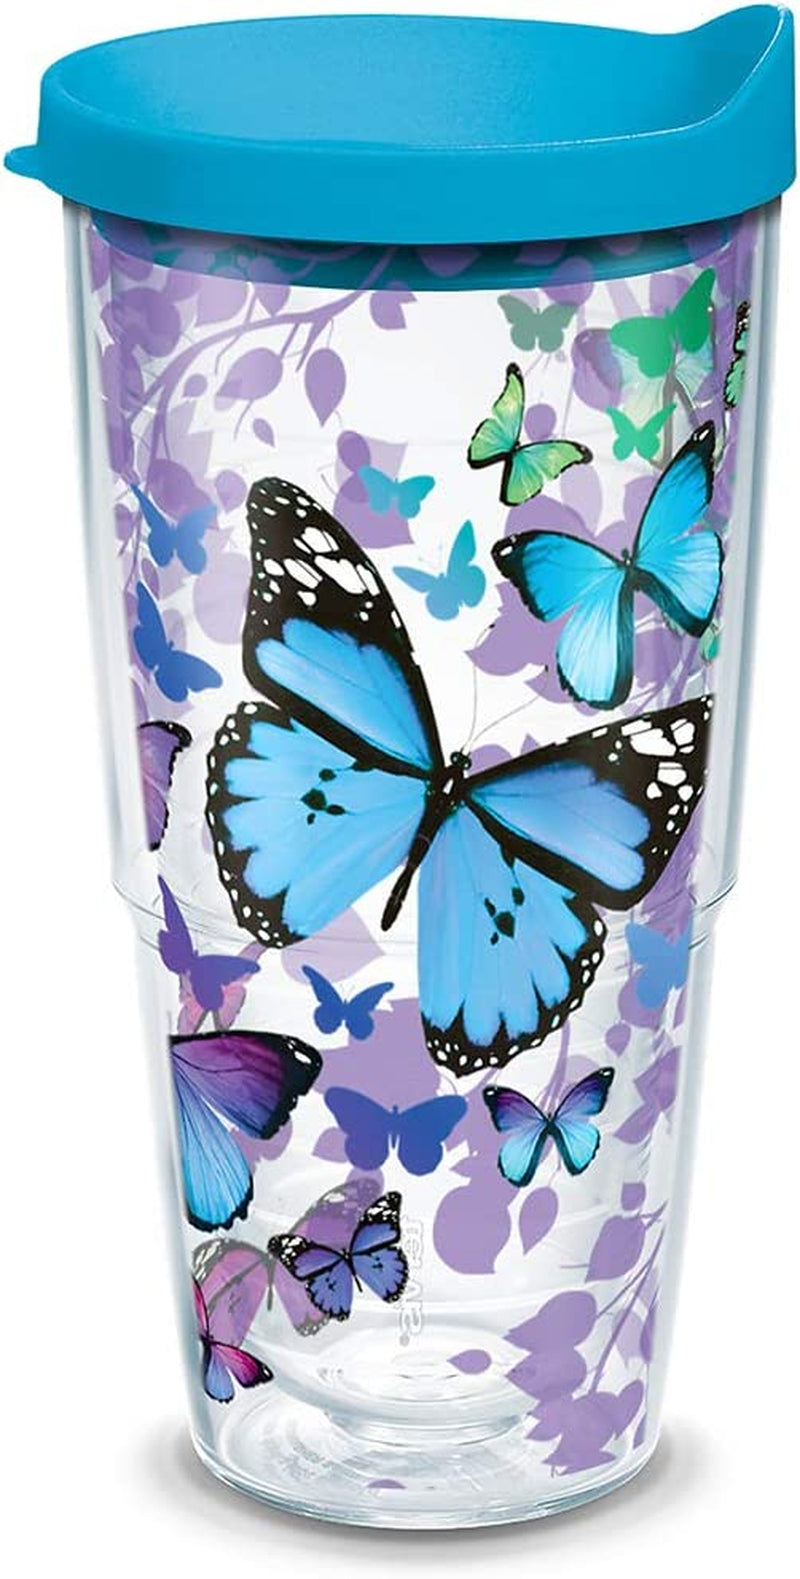 Tervis Blue Endless Butterfly Insulated Tumbler with Wrap and Turquoise Lid, 16Oz, Clear